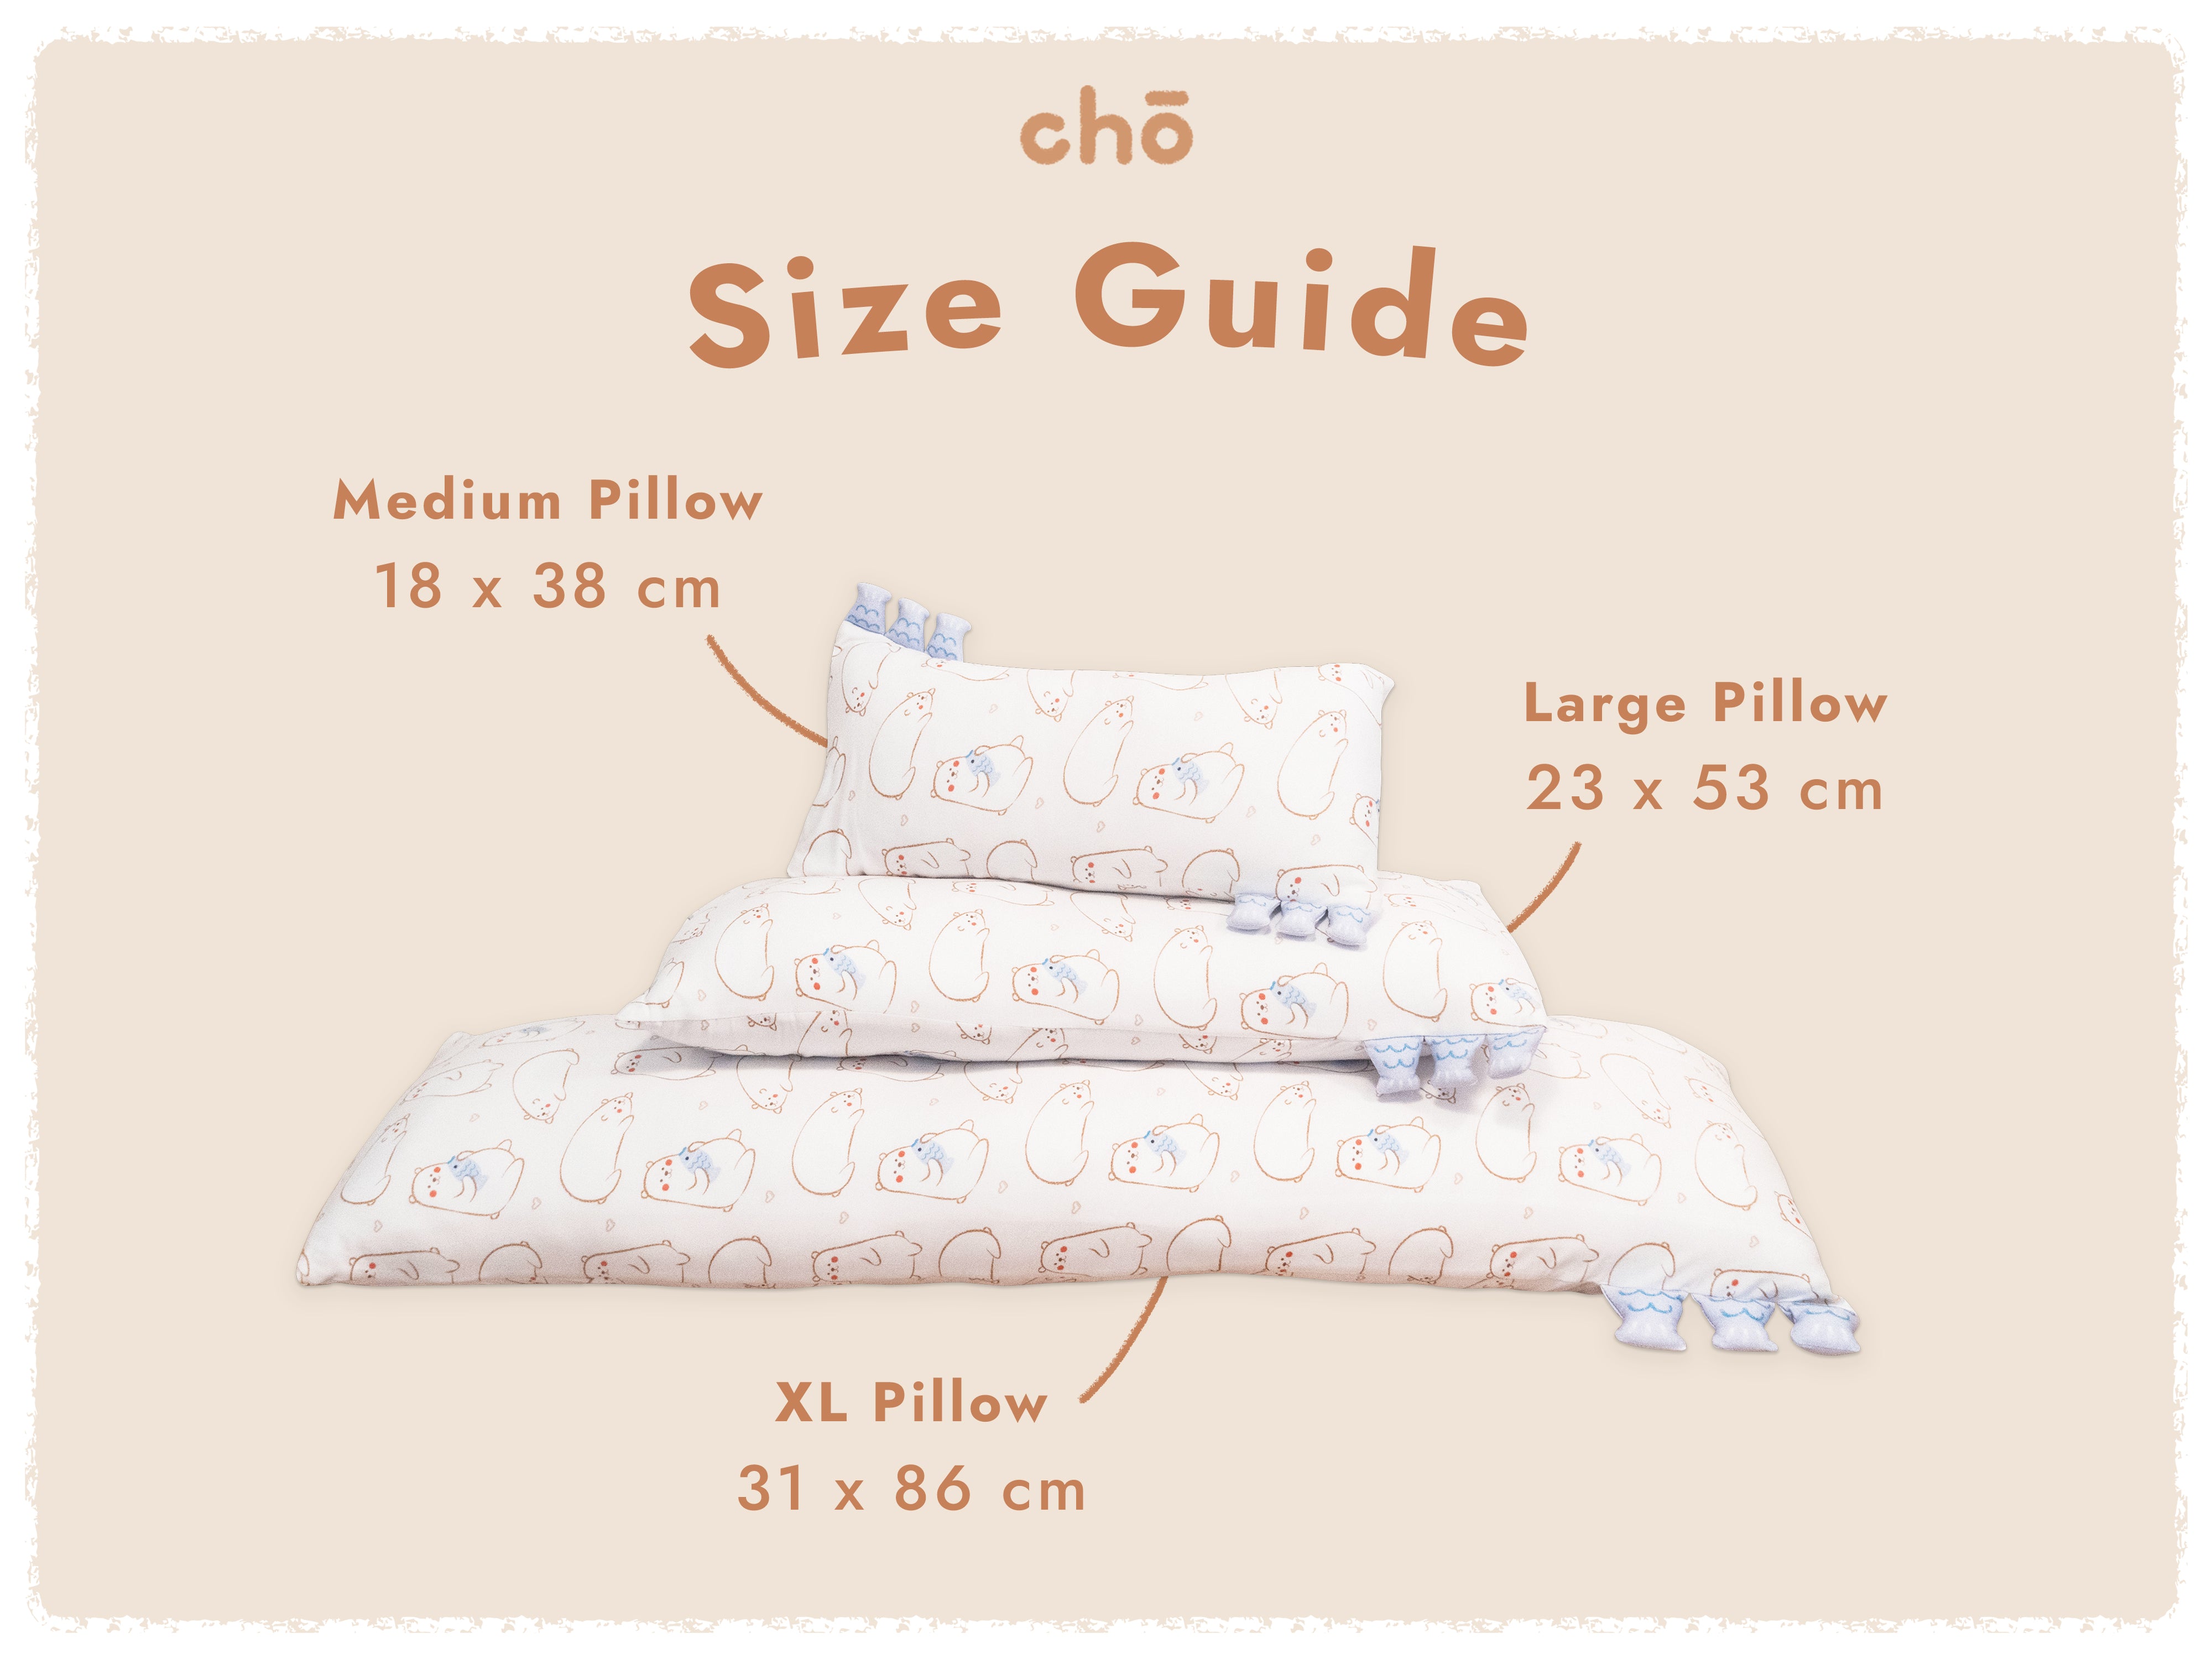 size comparison of three sizes of cho pillows maru bear